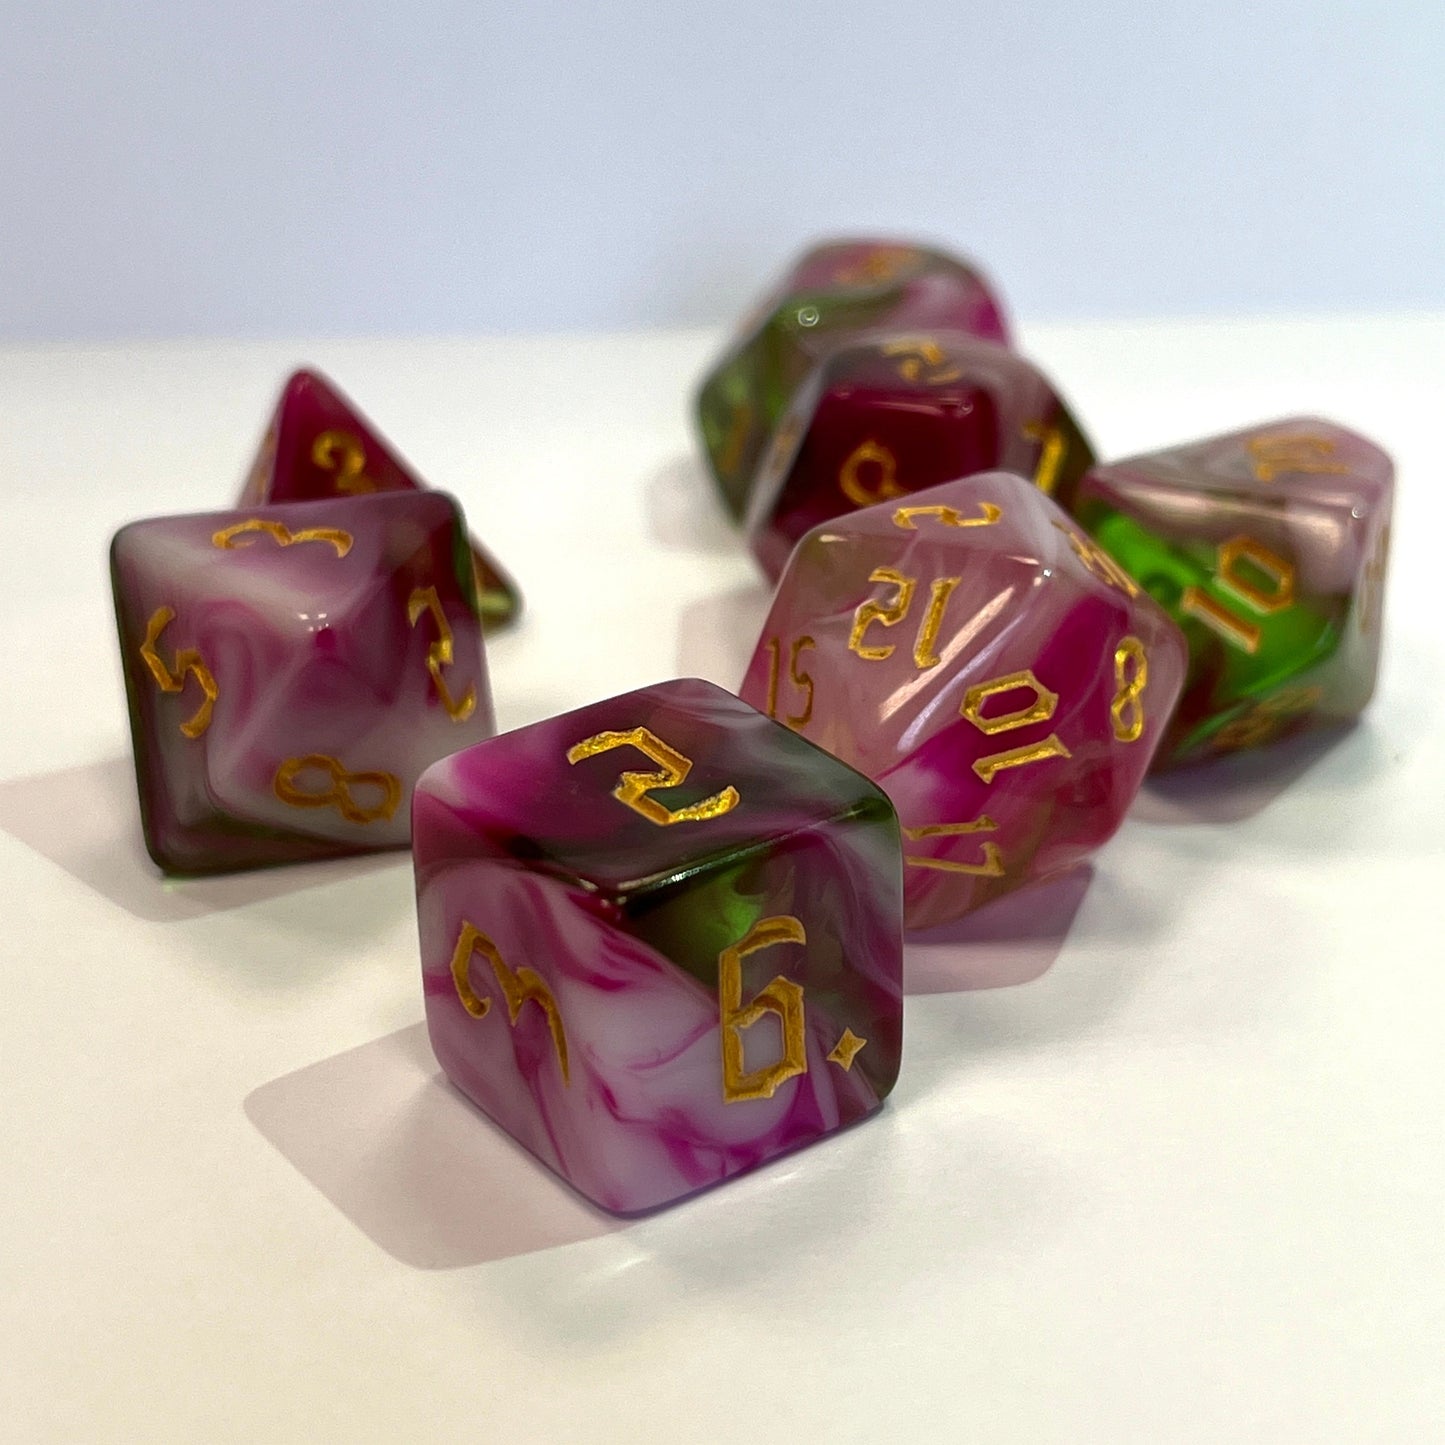 FeyWild DND dice set for RPG, DND, role playing games and dice goblin, critical critter collectors, uk dice store